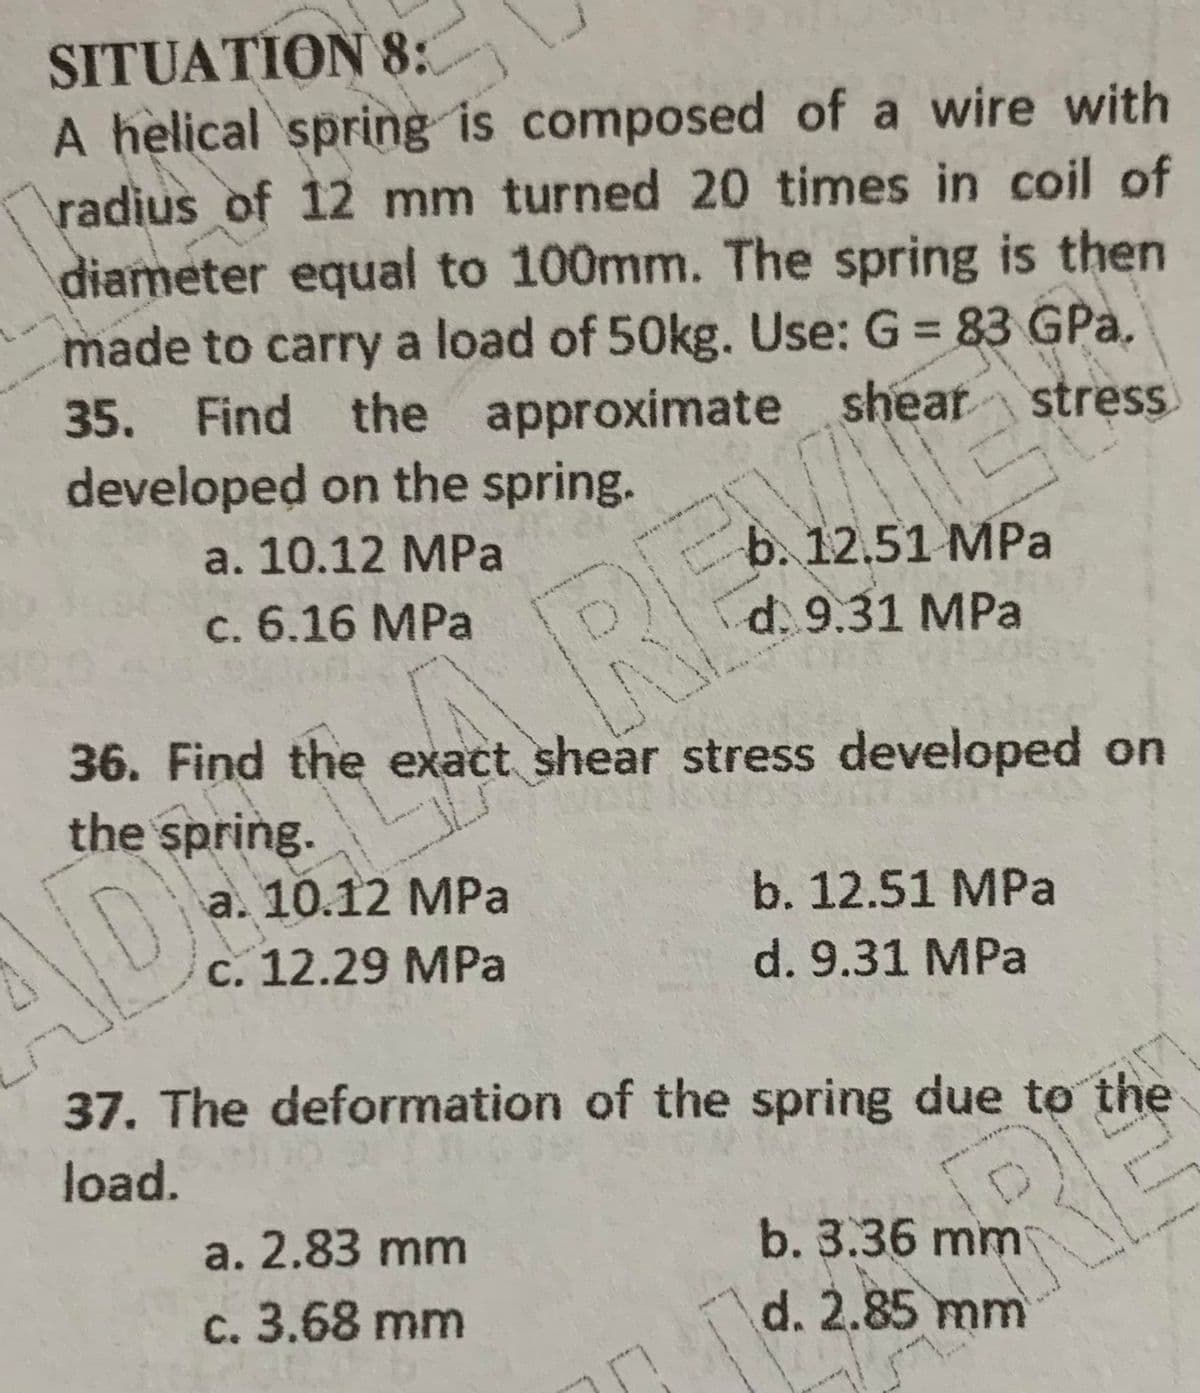 SITUATION 8:
A helical spring is composed of a wire with
radius of 12 mm turned 20 times in coil of
diameter equal to 100mm. The spring is then
made to carry a load of 50kg. Use: G = 83 GPa.
35. Find the approximate shear
developed on the spring.
%3D
b. 12.51 MPa
d. 9.31 MPa
a. 10.12 MPa
c. 6.16 MPa
36. Find the exact shear stress developed on
the spring.
a. 10.12 MPa
c. 12.29 MPa
b. 12.51 MPa
DE REUES
d. 9.31 MPa
37. The deformation of the spring due to the
load.
a. 2.83 mm
b. 3.36 mm
c. 3.68 mm
d. 2.85 mm
